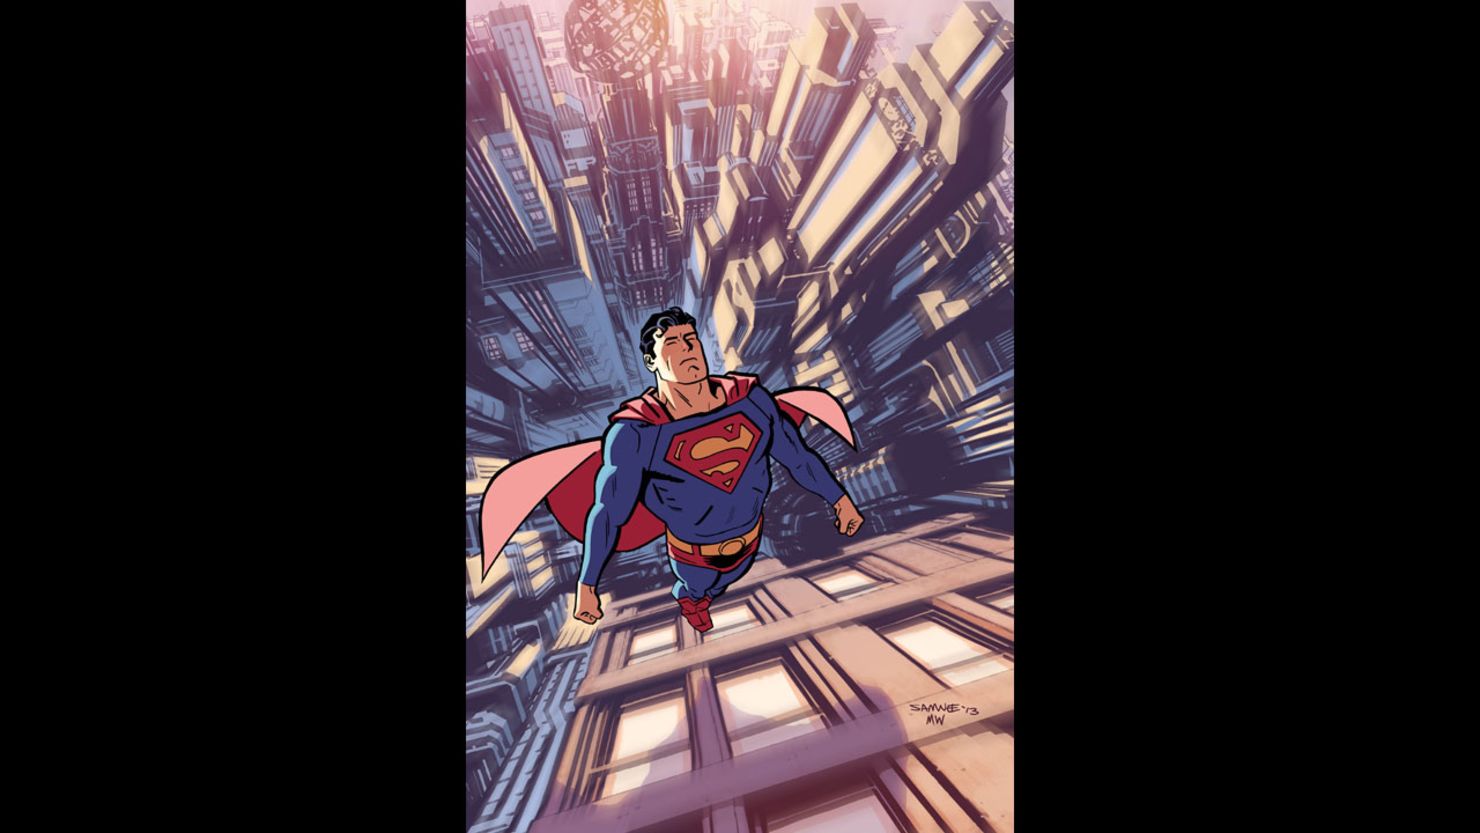 A new "Adventures of Superman" digital comics series will debut with the help of Orson Scott Card, an outspoken critic of same-sex marriage.